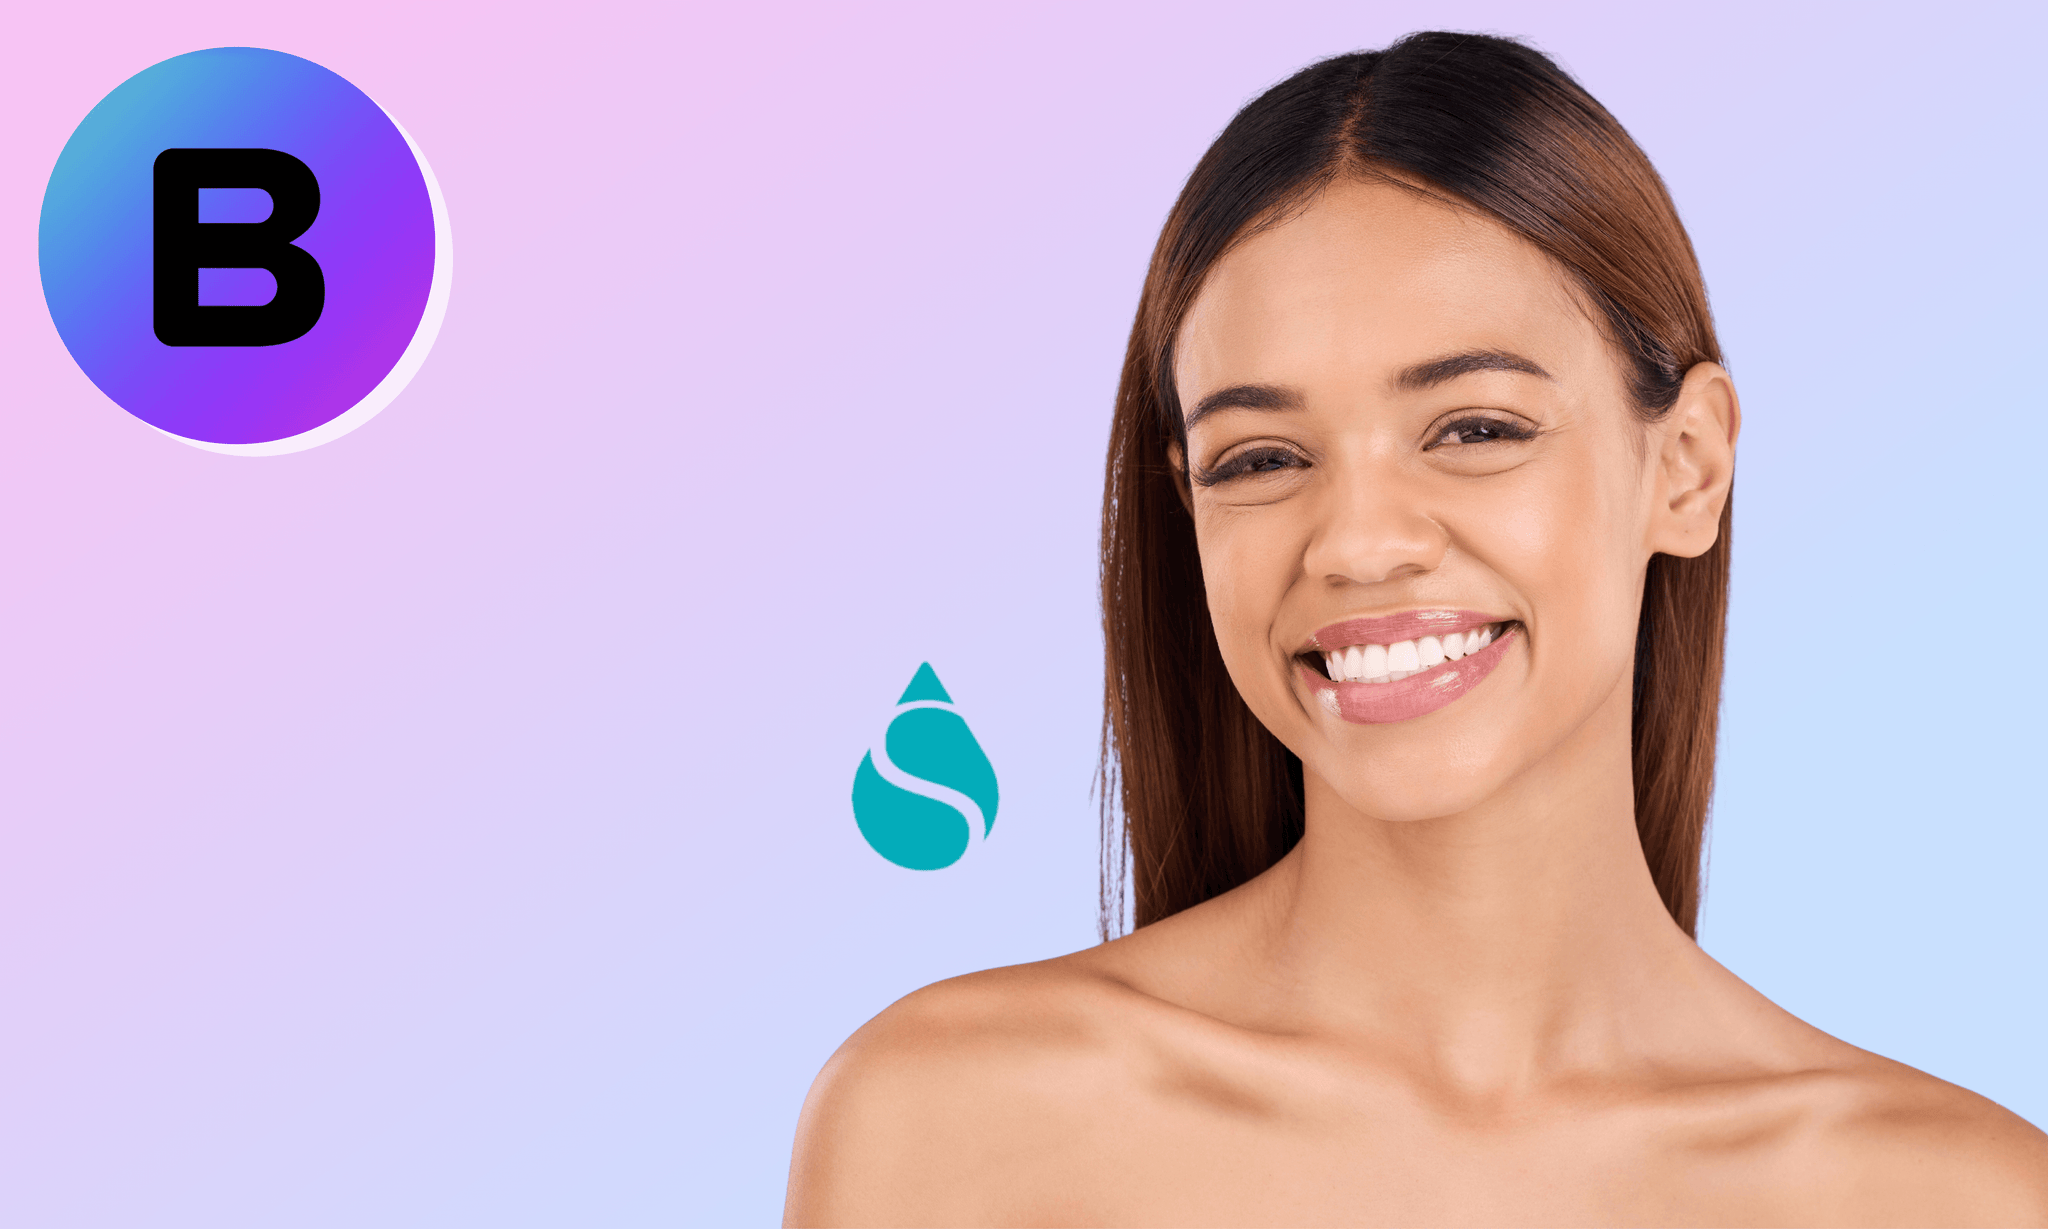 New Treatment Alert! Introducing SkinVive